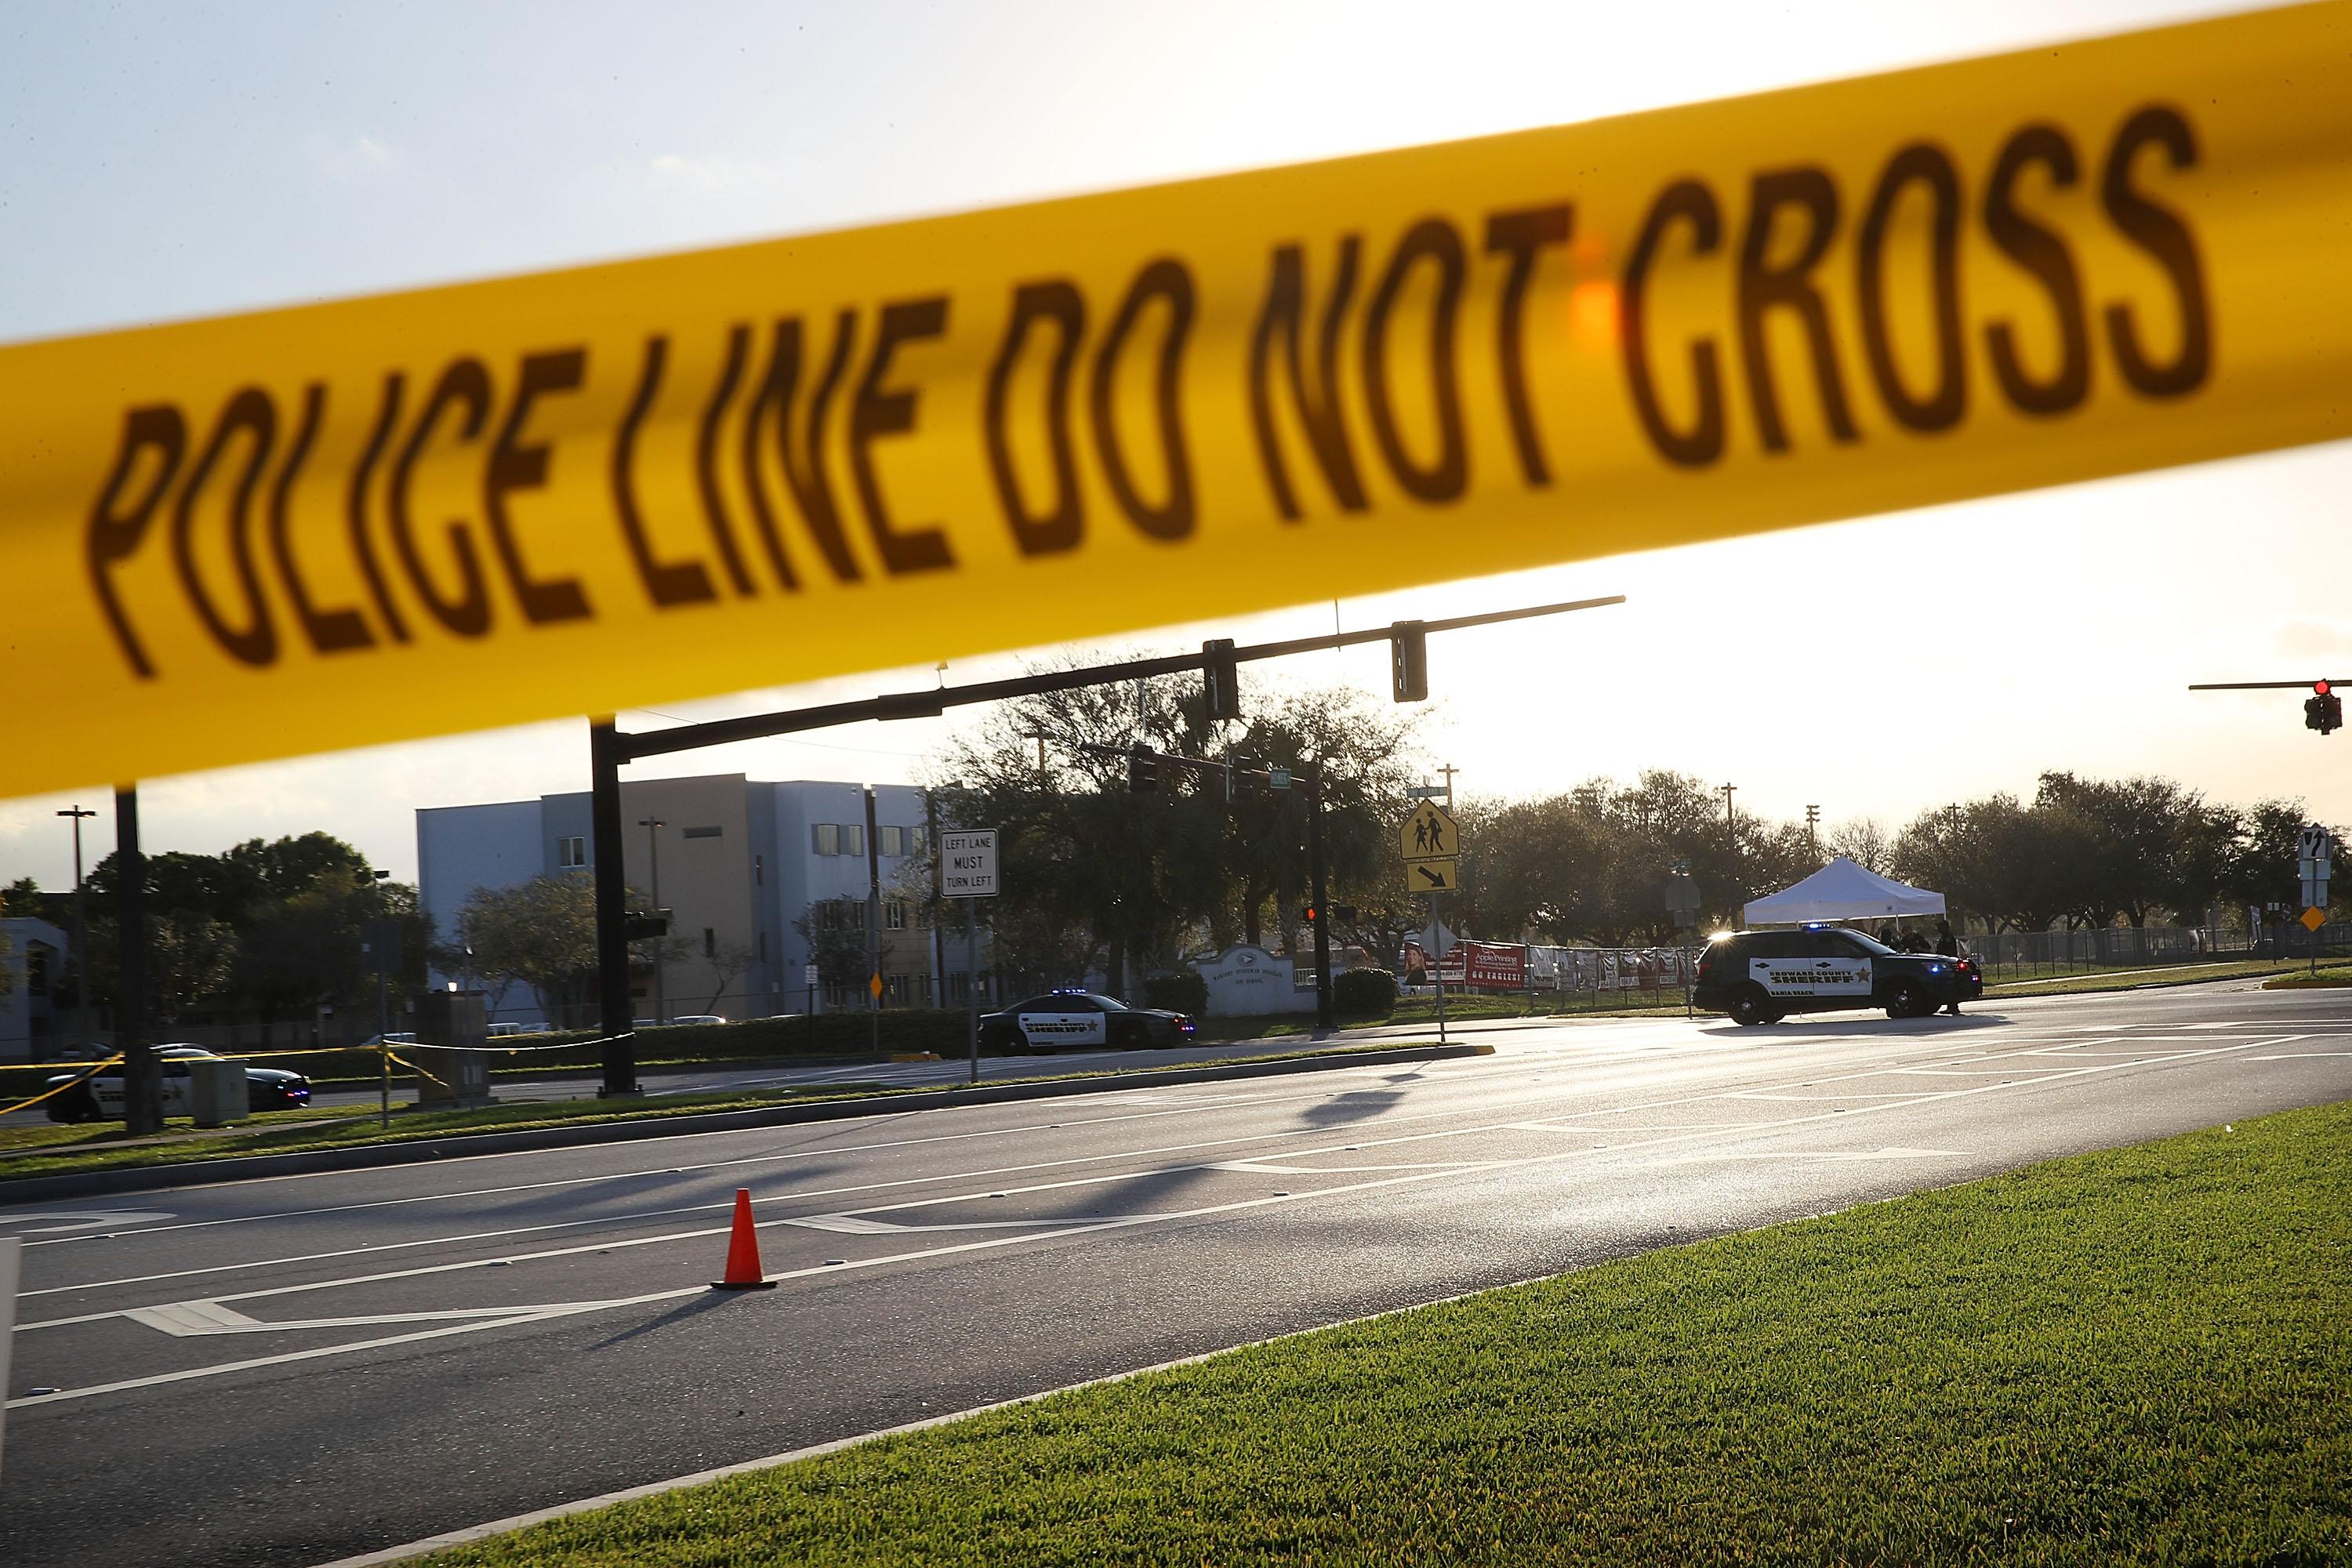 Police and caution tape reading "Police Line Do Not Cross" in front of Marjory Stoneman Douglas High School in Parkland, Florida